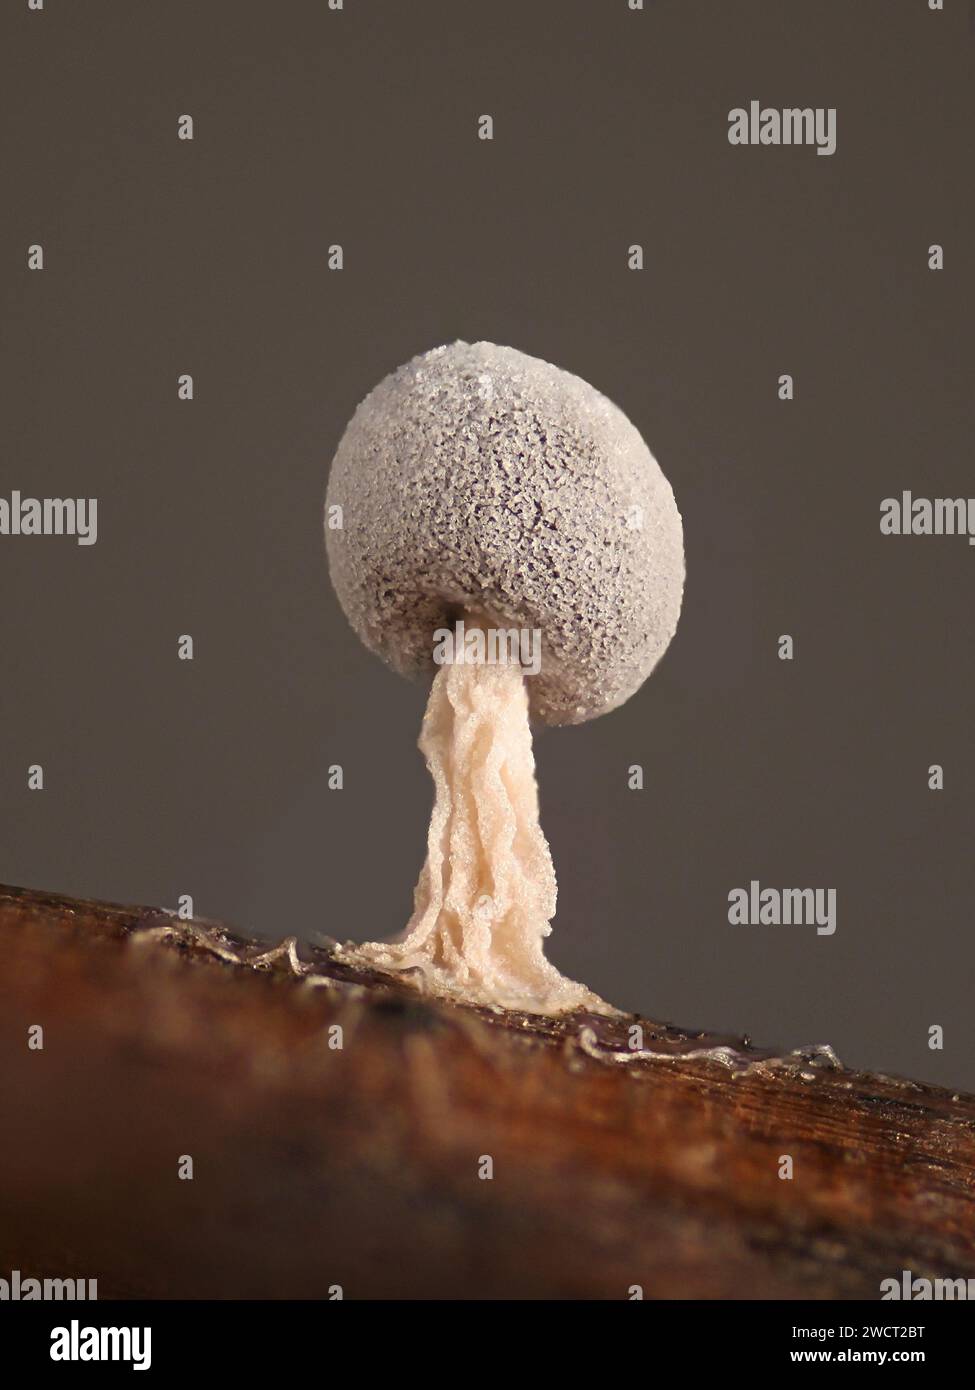 Didymium squamulosum, a slime mold from Finland, no common English name Stock Photo